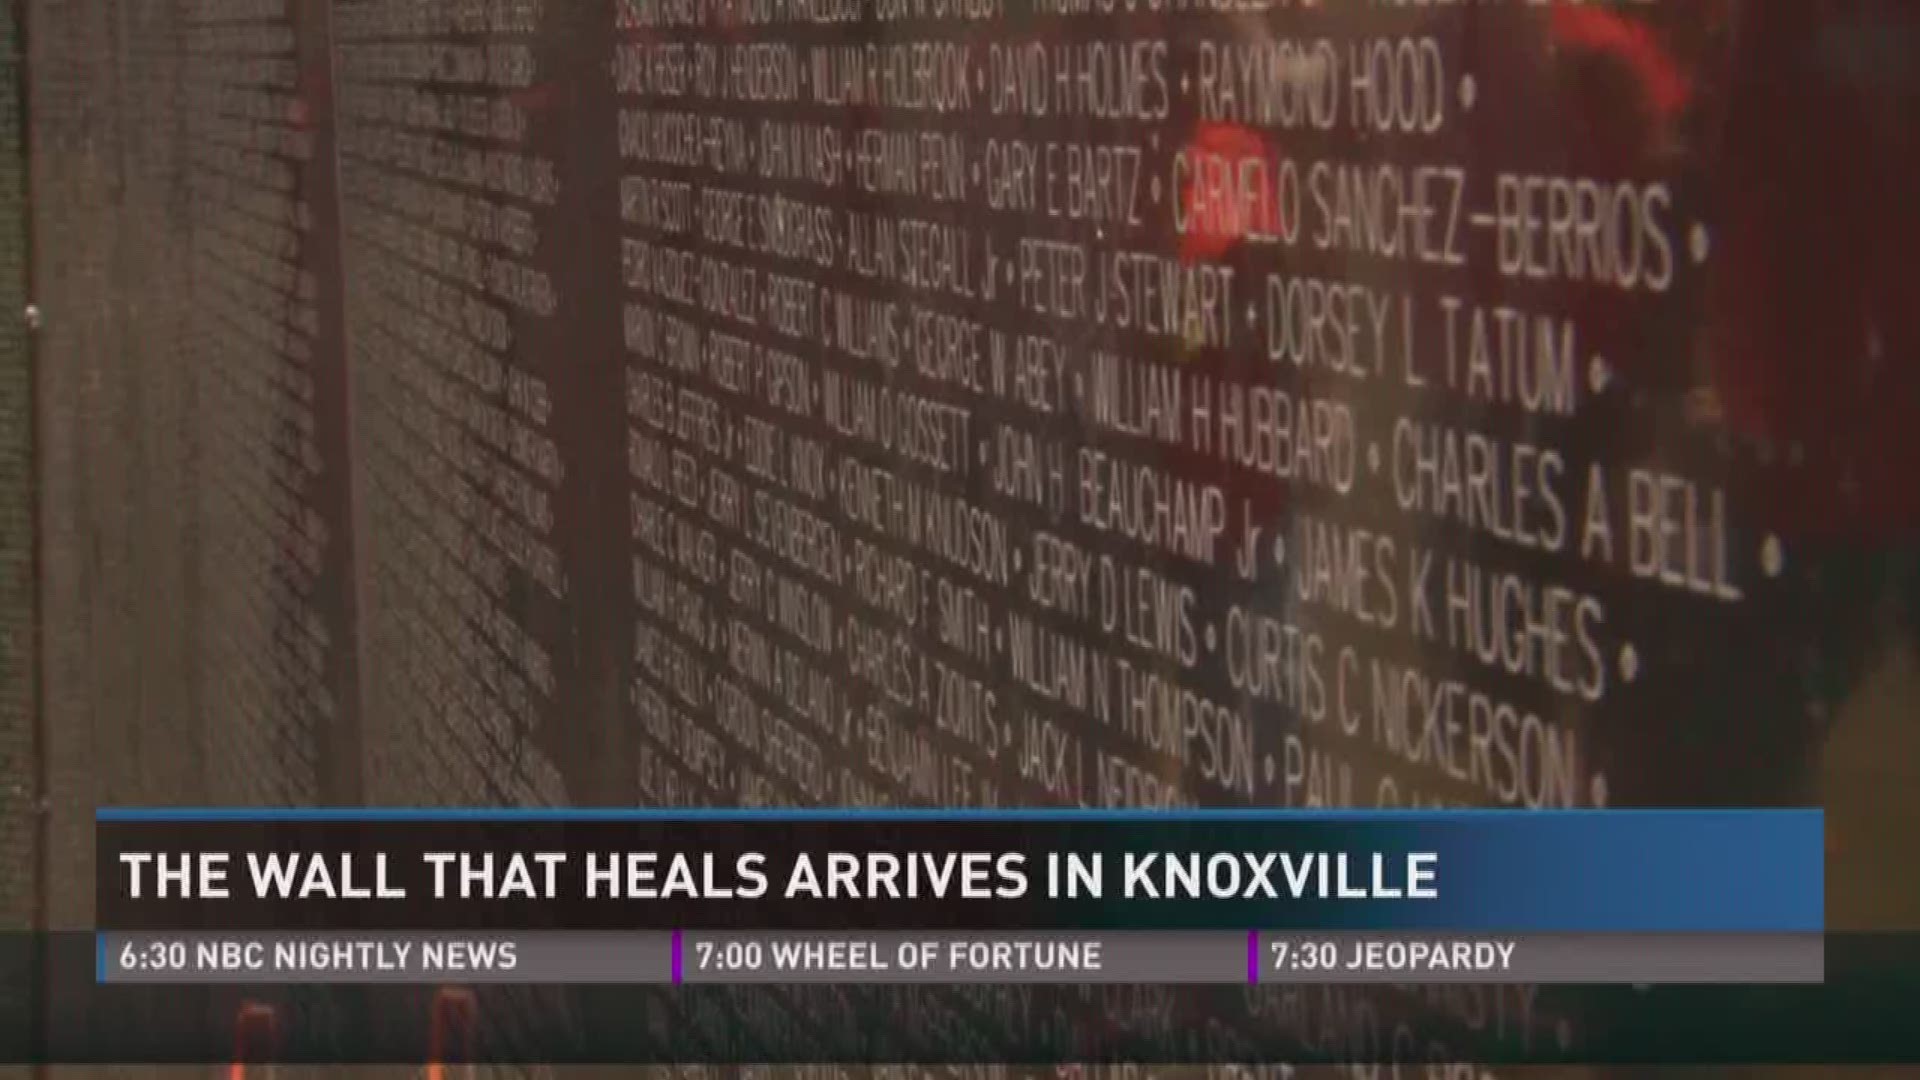 Veterans and volunteers spent their day working hard to set up the Wall That Heals, a traveling Vietnam War Memorial now in Knoxville.